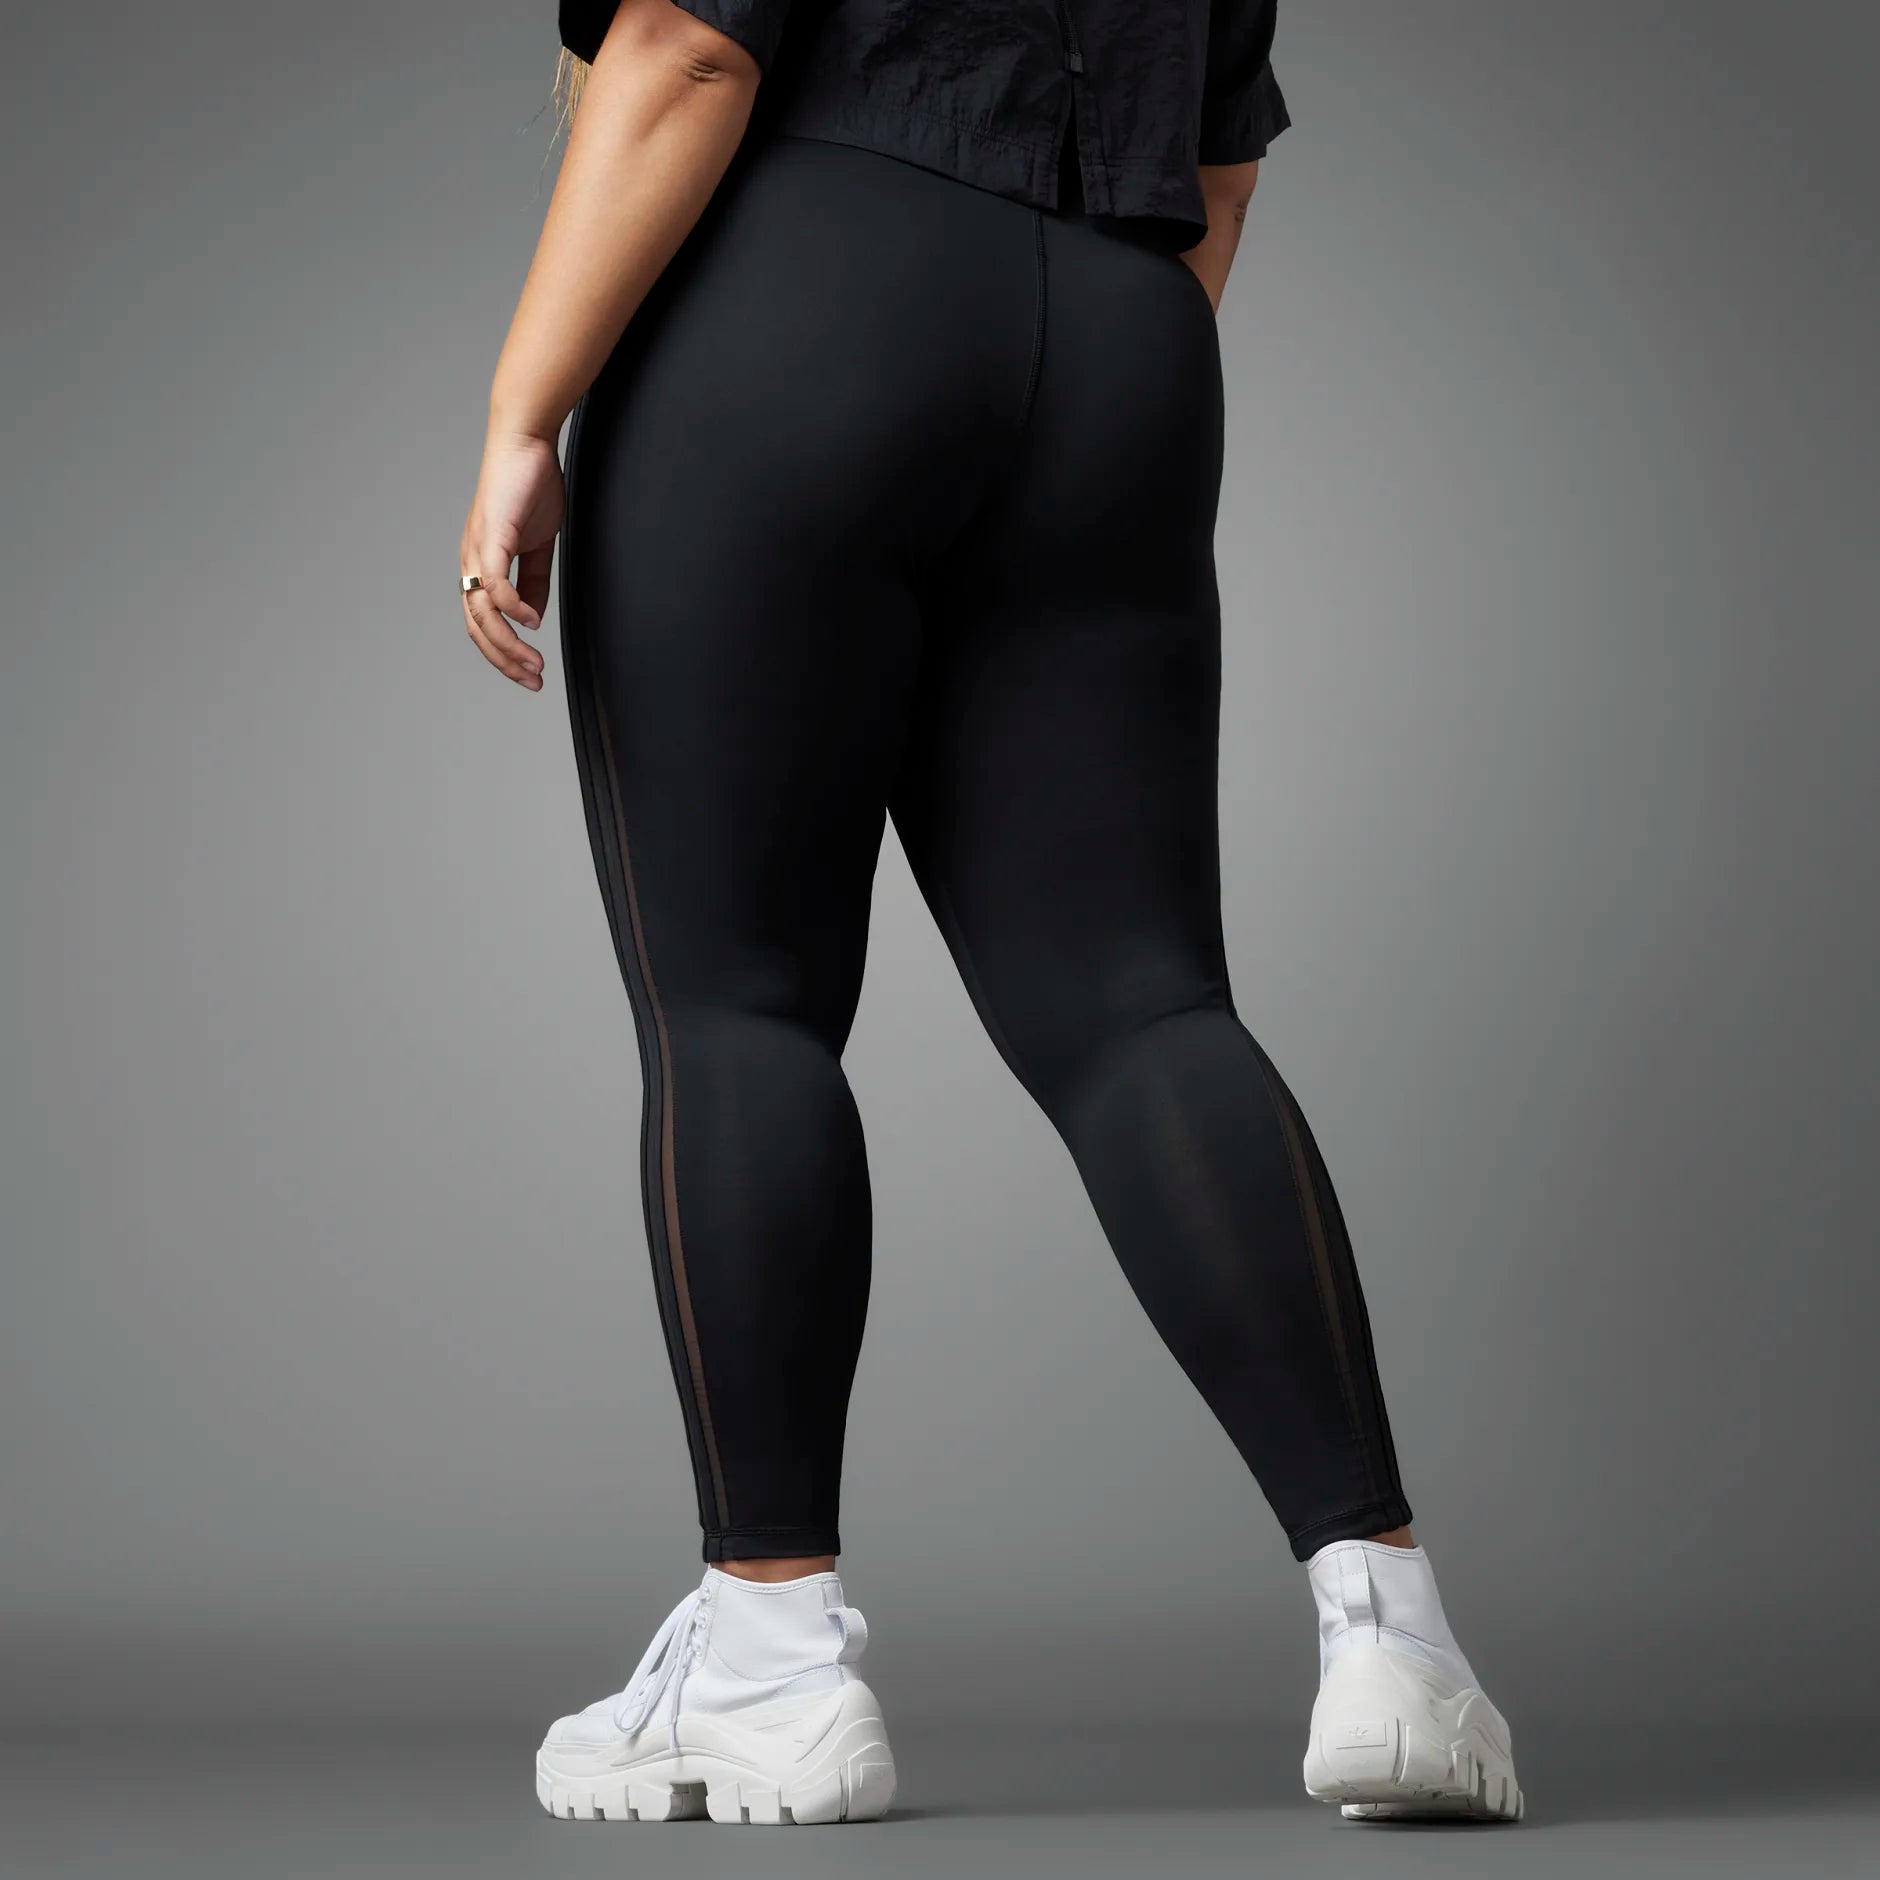 Plus Size Ribbed Leggings. Face Swap. Insert Your Face ID:1673572